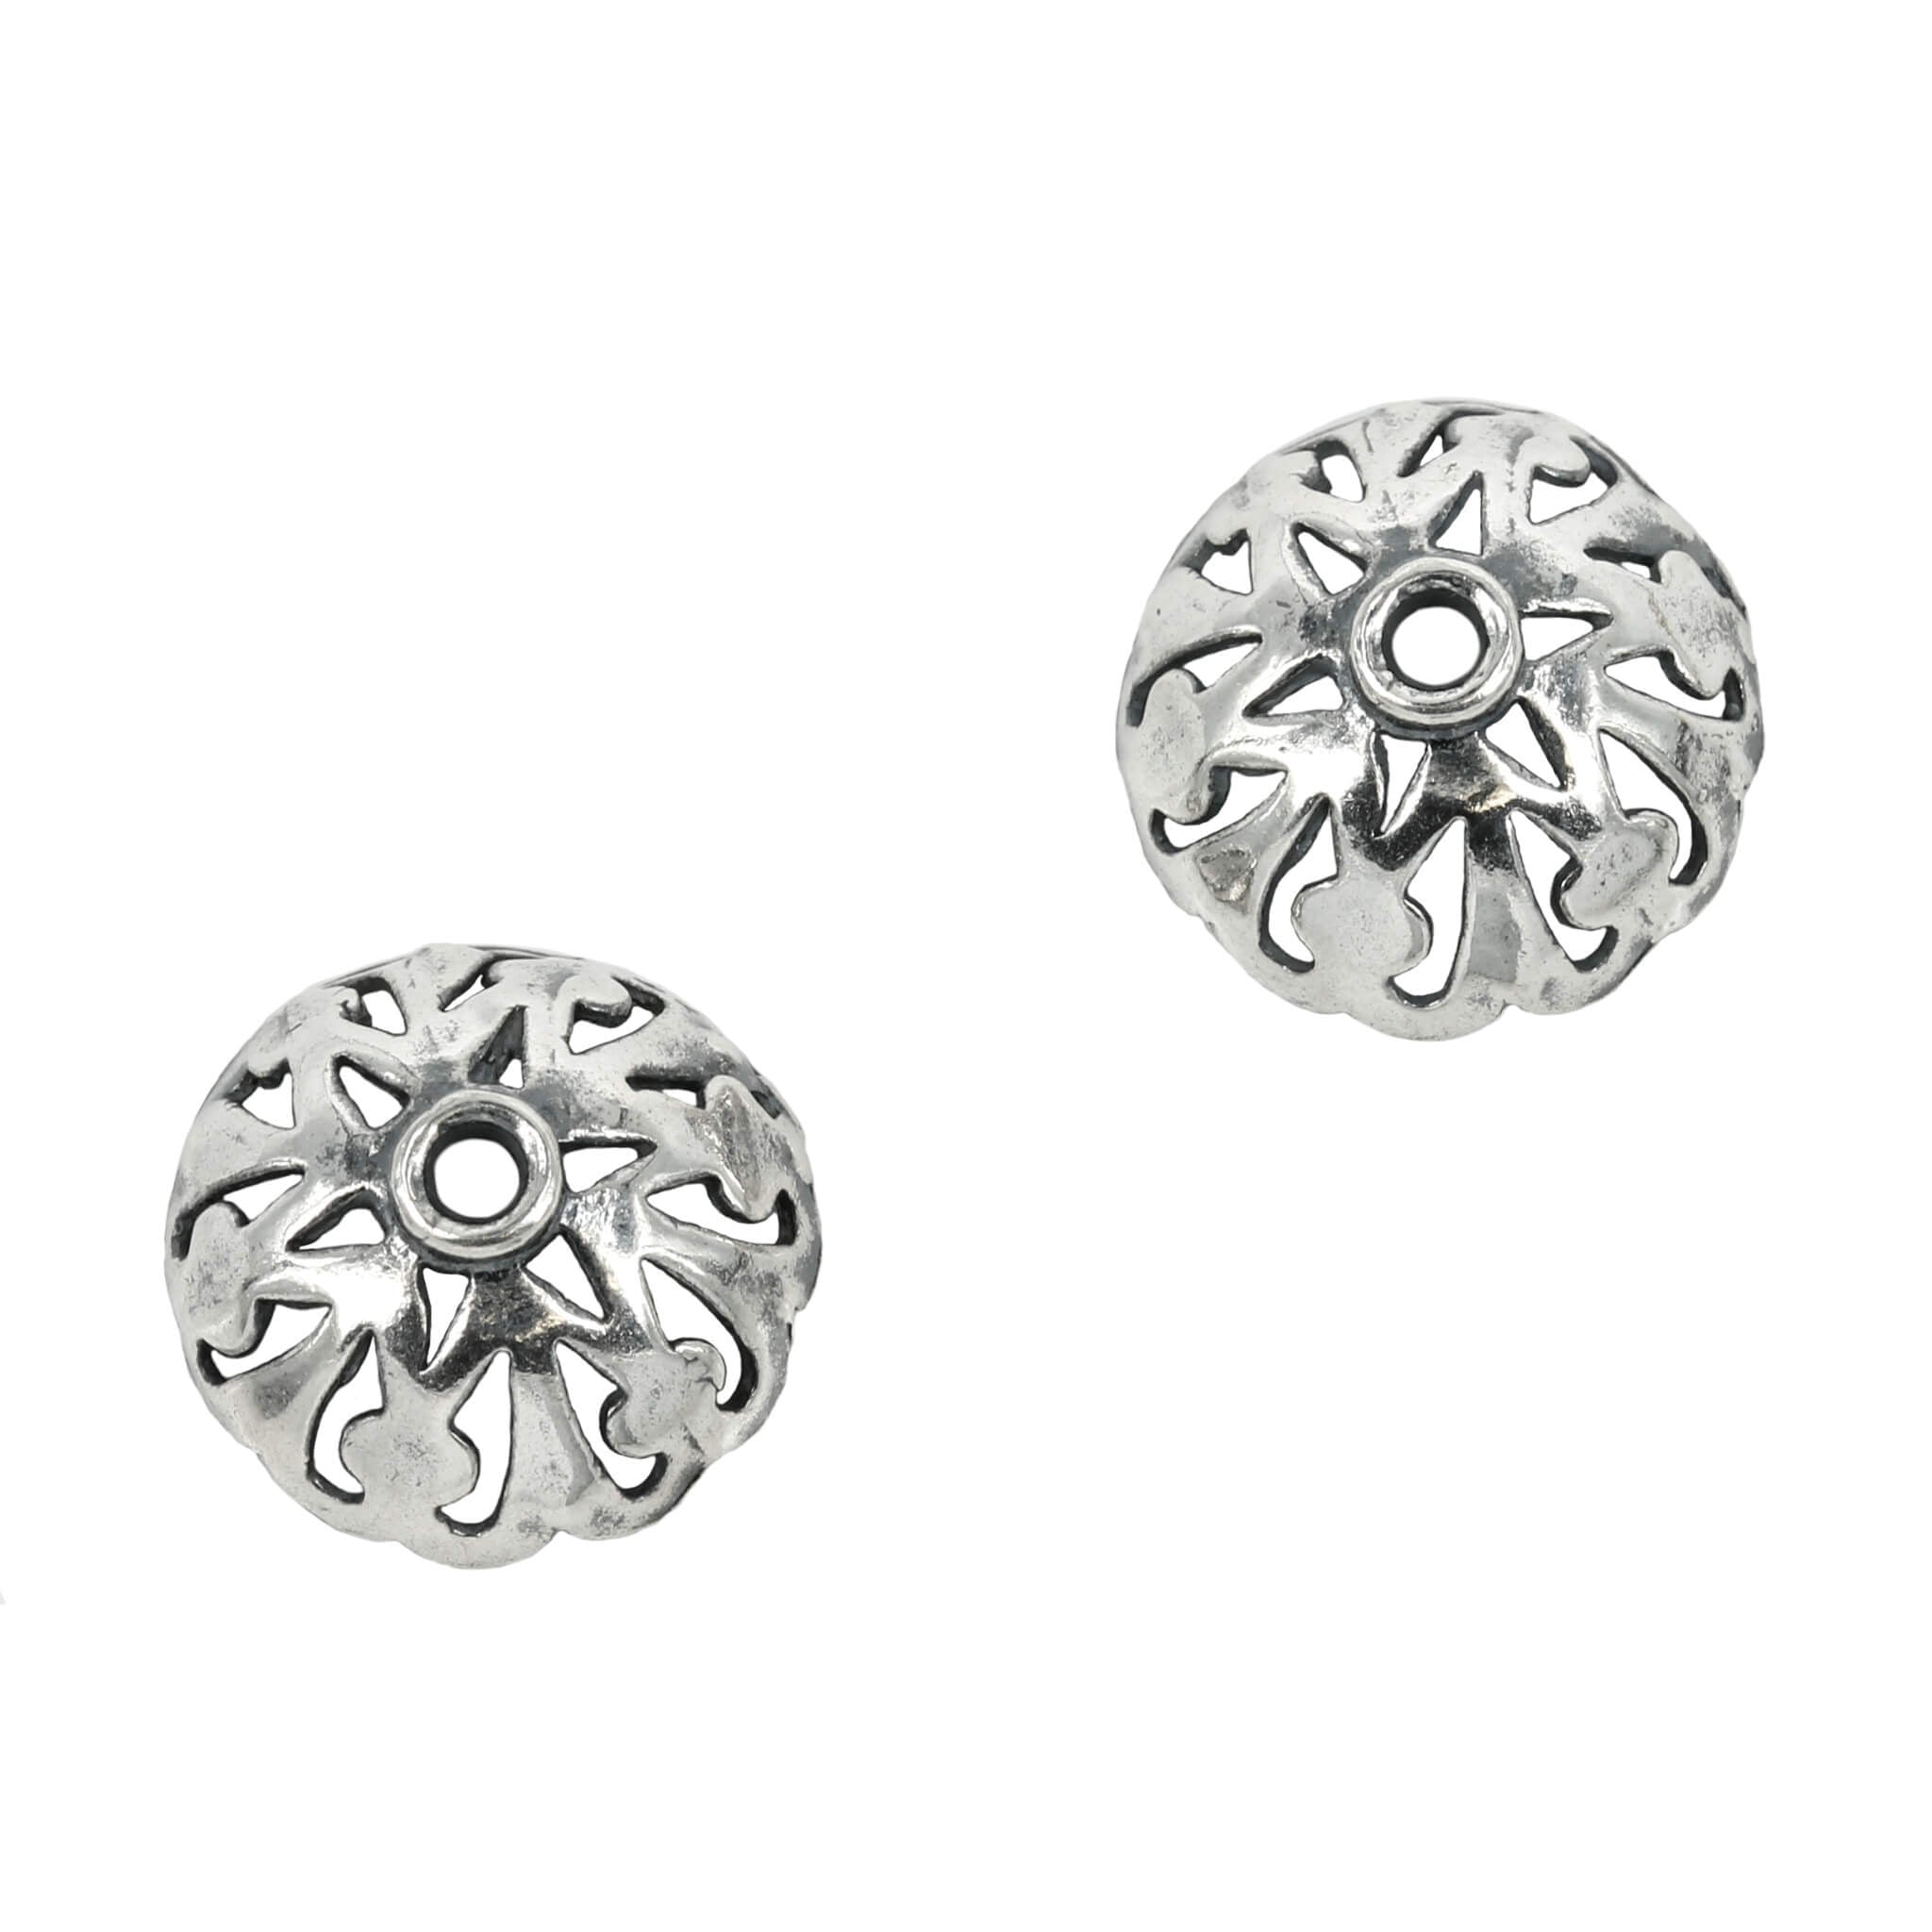 Patterned Bead Cap in Antique Sterling Silver 13.6mm